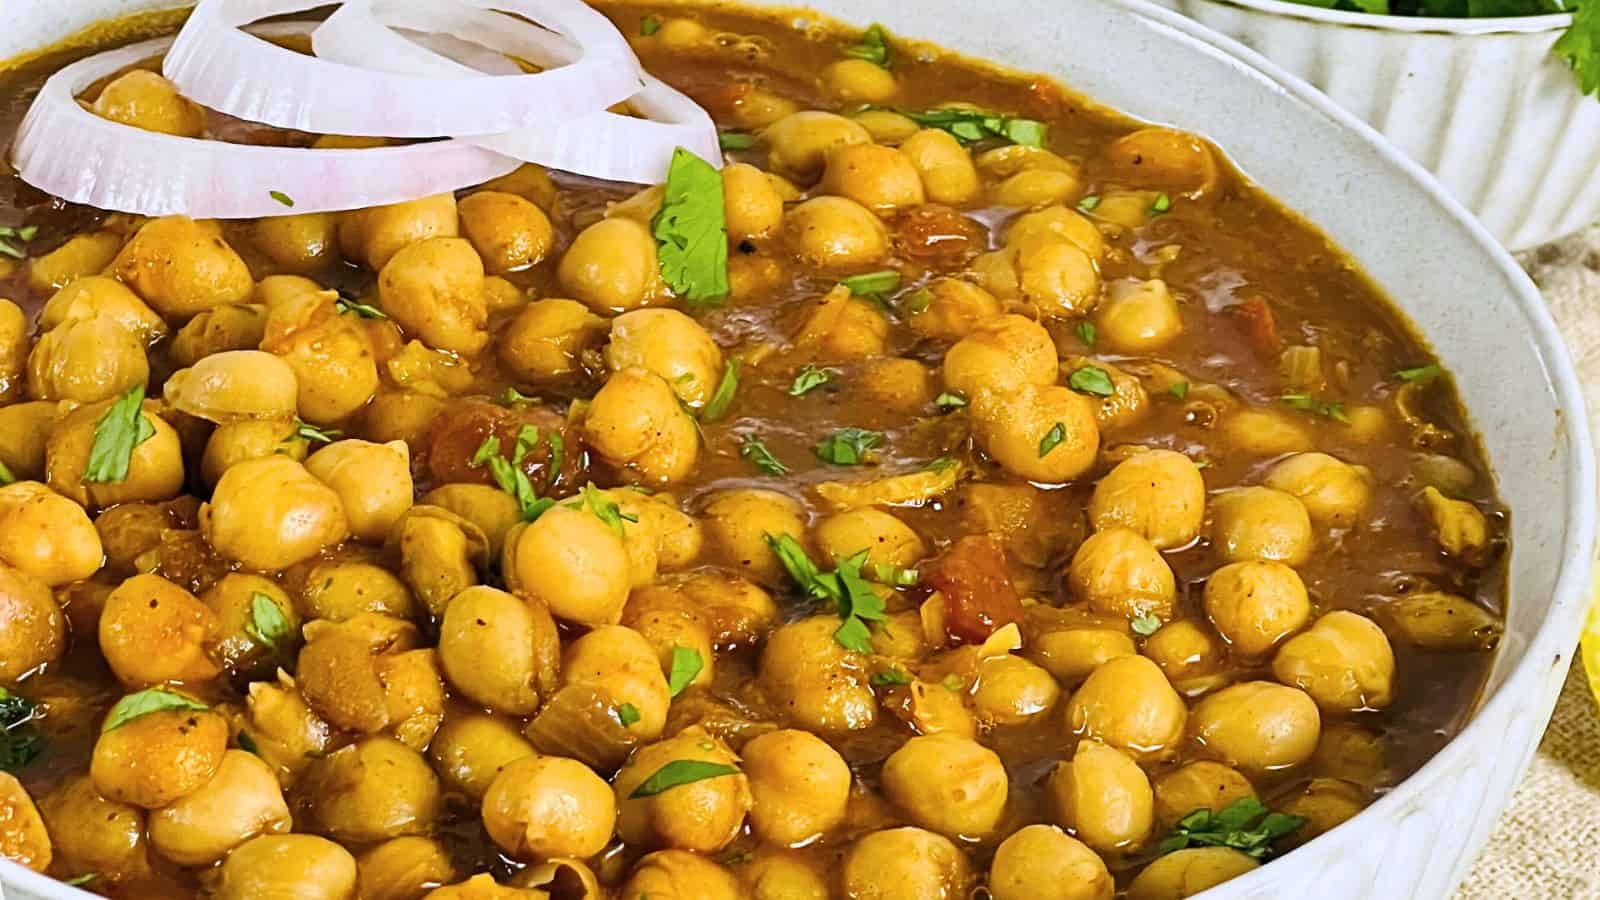 A bowl of Chana Masala garnished with fresh herbs and onion slices.